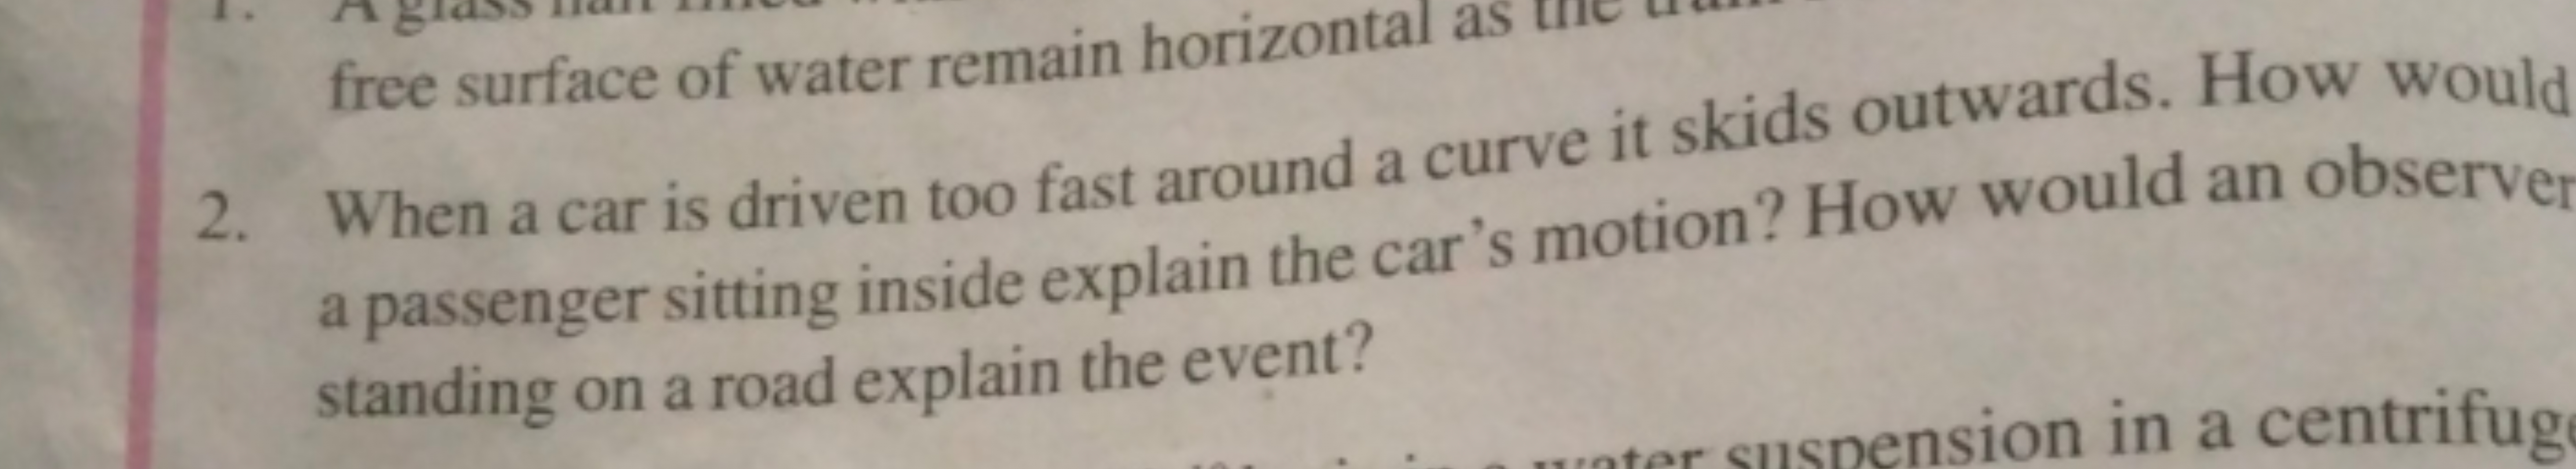 2. When a car is driven too fast around a curve it skids outwards. How